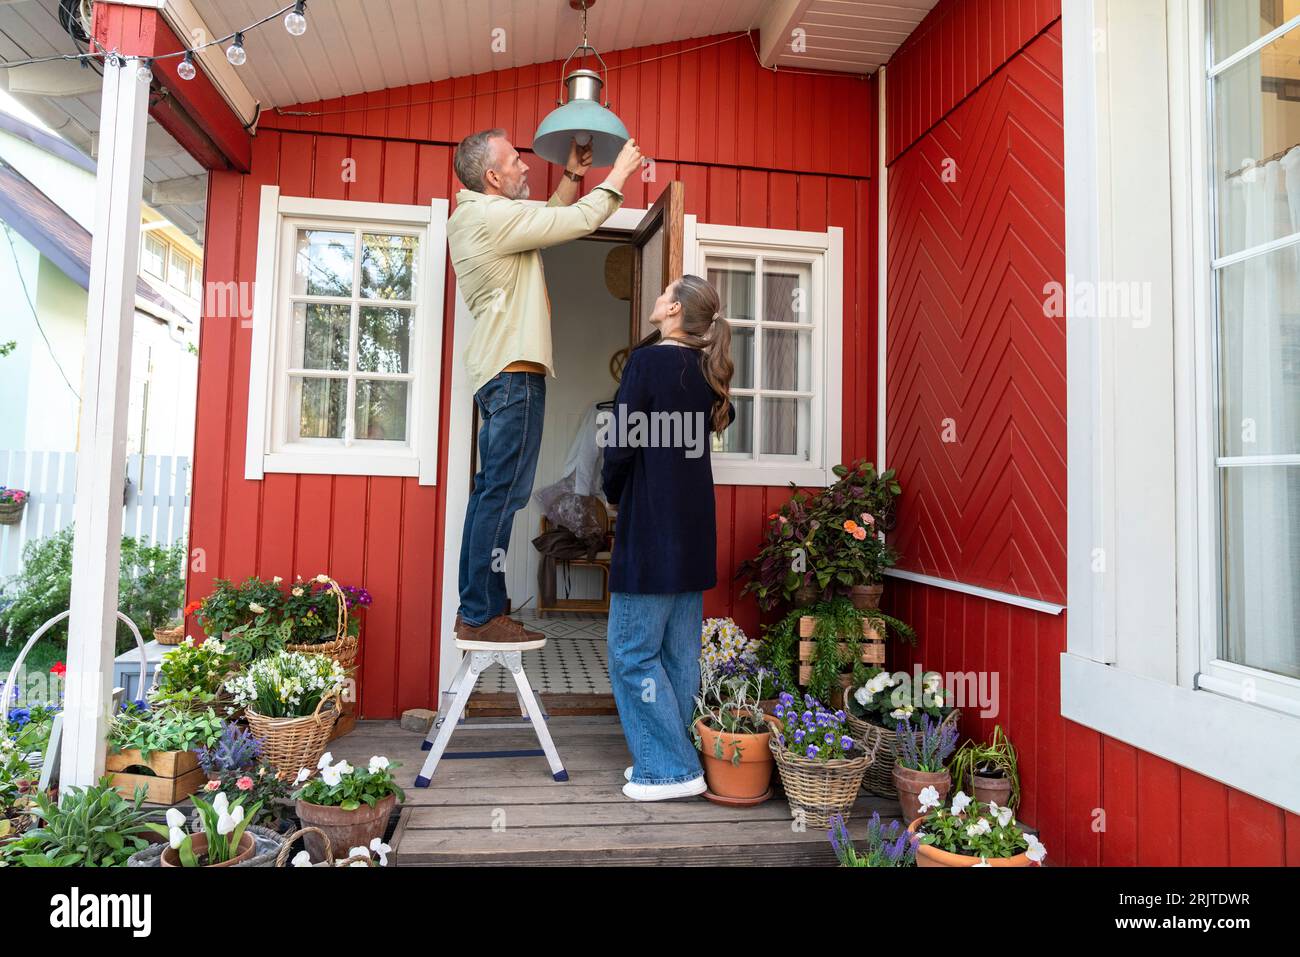 Man and woman changing lamp light standing on porch Stock Photo